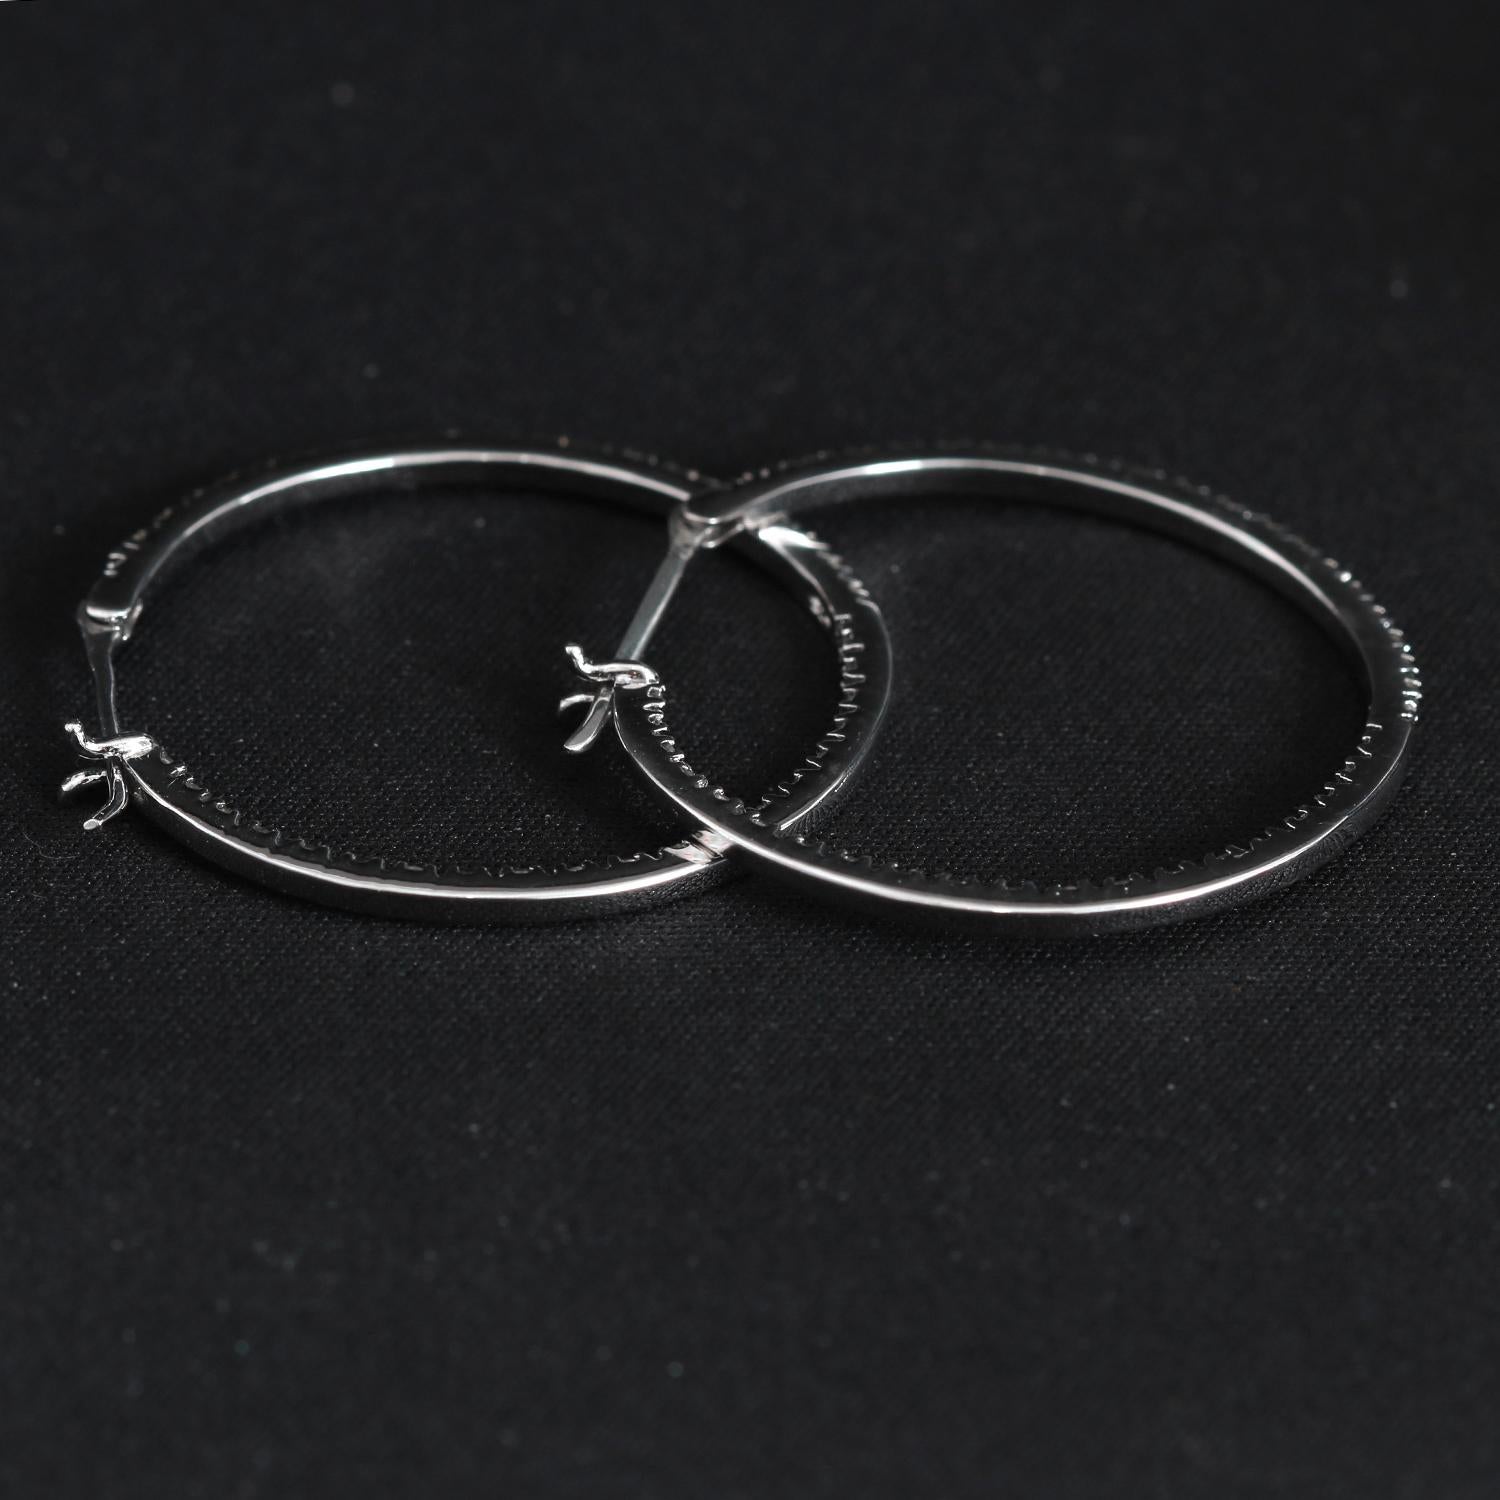 Amazing 14k White Gold Diamond Inside-Out Hoop Earrings In Excellent Condition For Sale In Dallas, TX